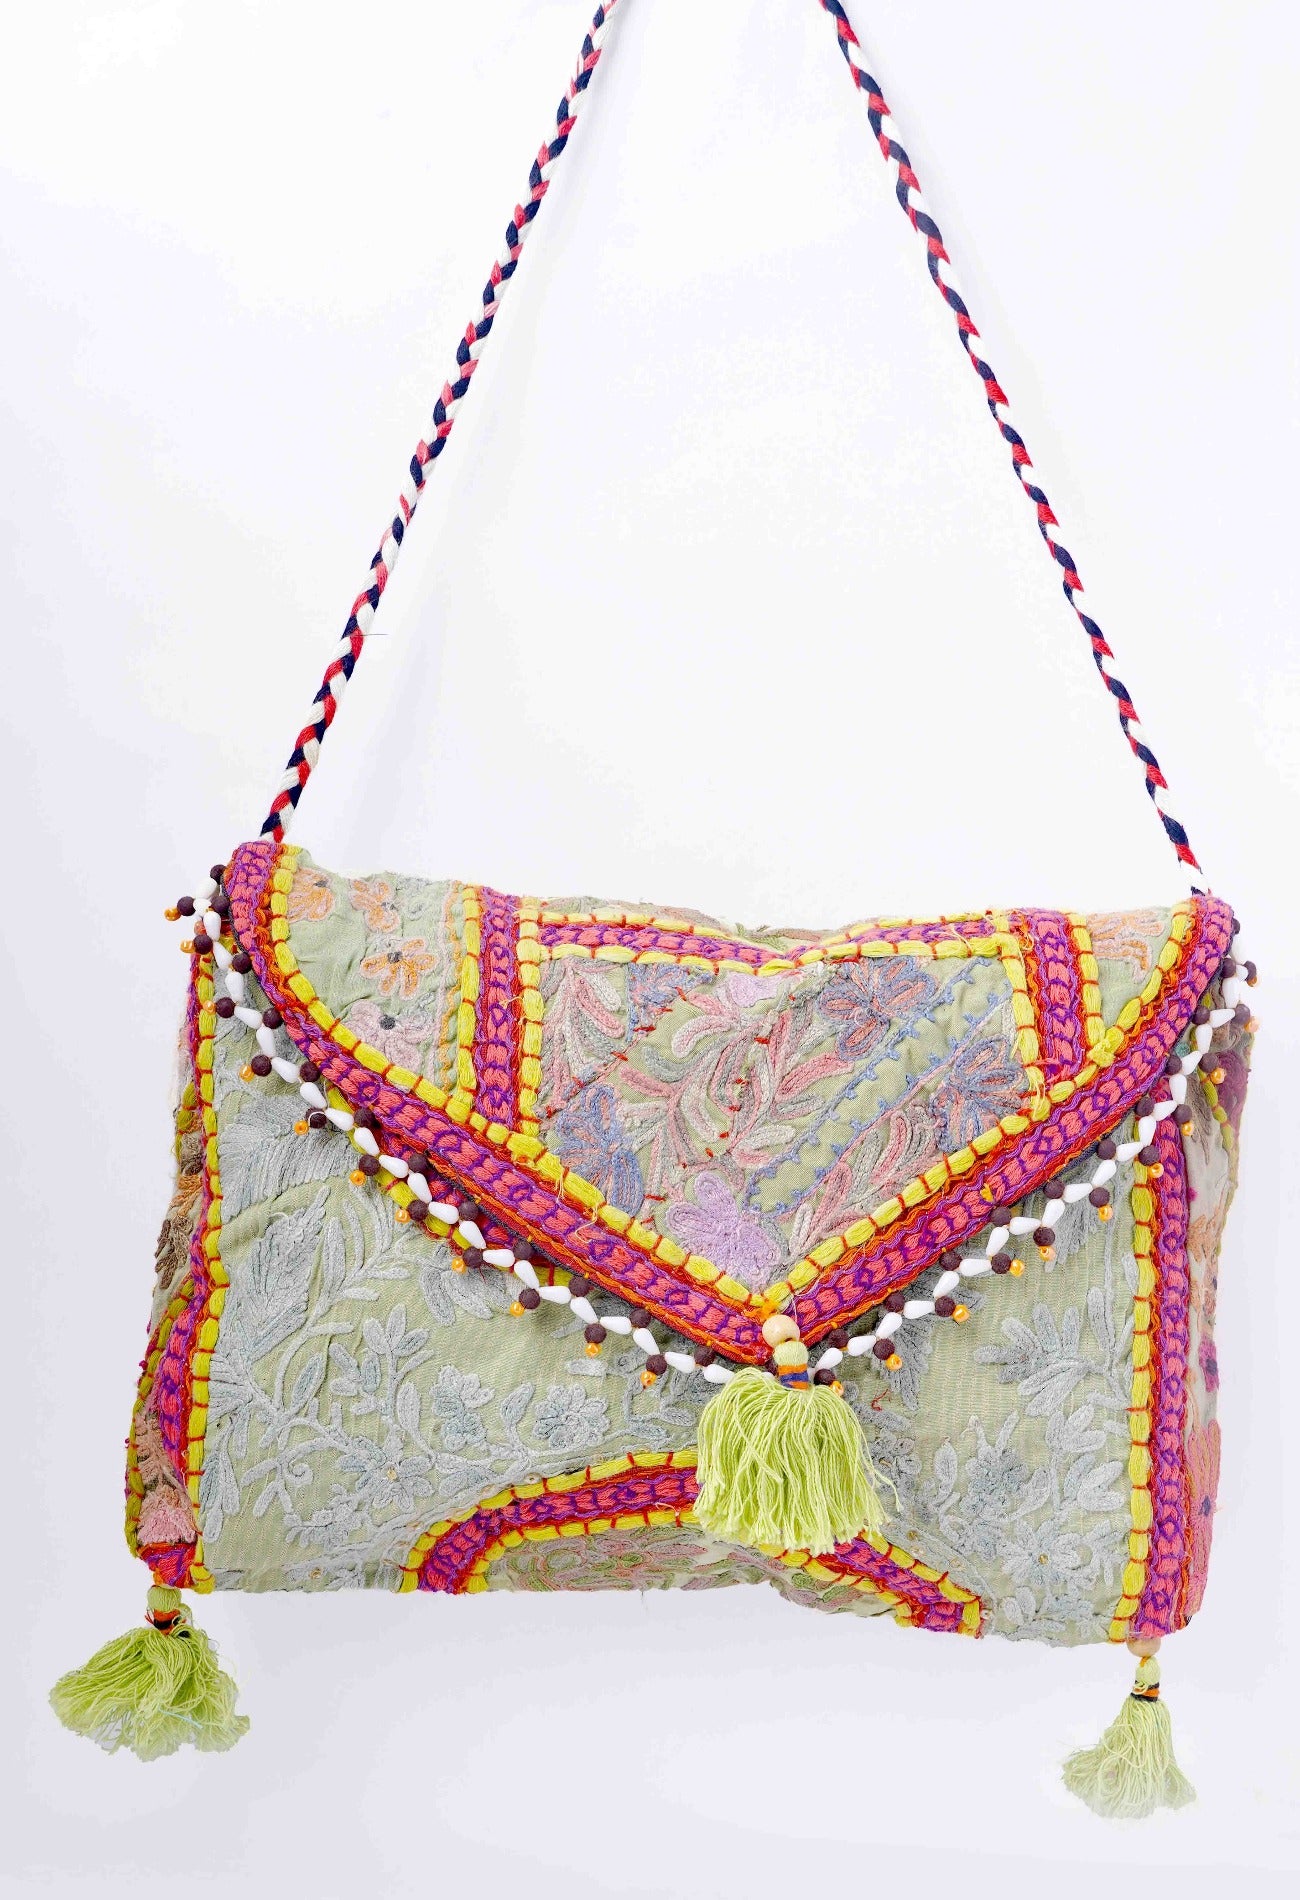 Online Shopping for Green Indian Handicraft Embroidered Hand Bag with Weaving from Rajasthan at Unnatisilks.com India_x000D_
Online Shopping for Green Indian Handicraft Embroidered Hand Bag with Weaving from Rajasthan at Unnatisilks.com India_x000D_
Online Shopping for Green Indian Handicraft Embroidered Hand Bag with Weaving from Rajasthan at Unnatisilks.com India_x000D_
